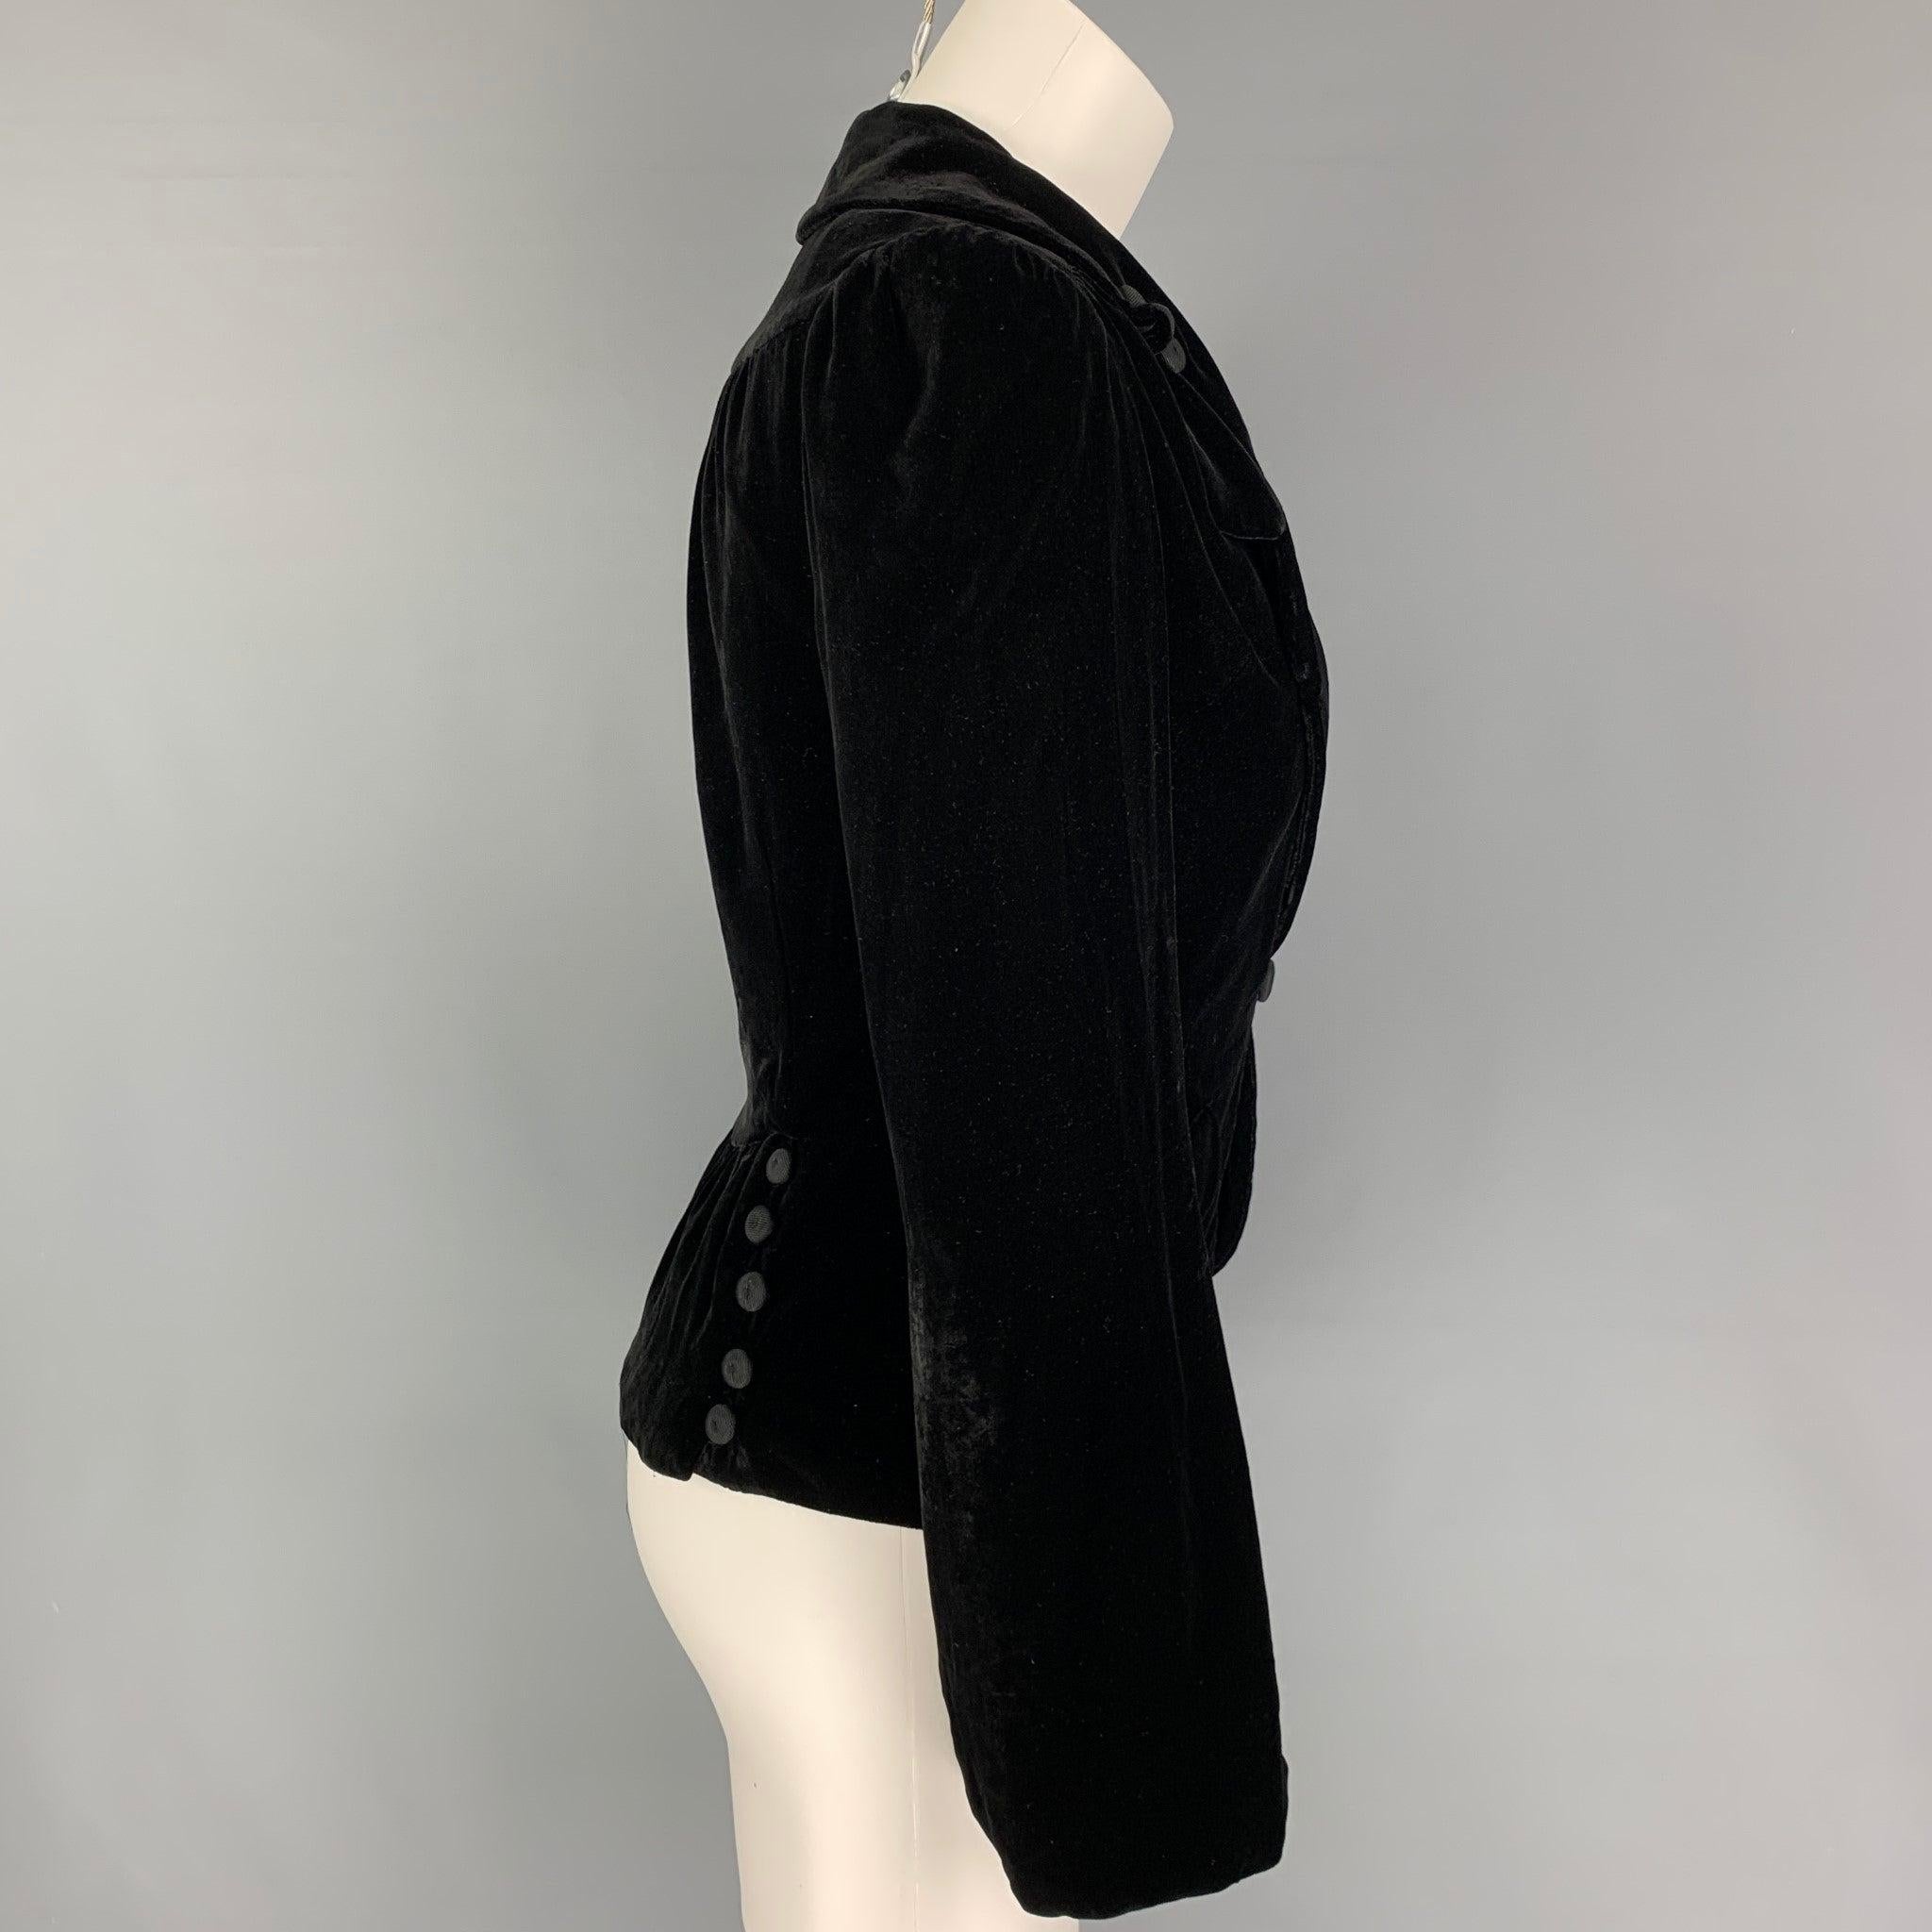 MARC JACOBS jacket comes in a black velvet rayon blend featuring a notch lapel, flap pockets, buttoned details, and a single button closure.
Very Good
Pre-Owned Condition. 

Marked:   2 

Measurements: 
 
Shoulder: 14 inches  Bust: 34 inches 